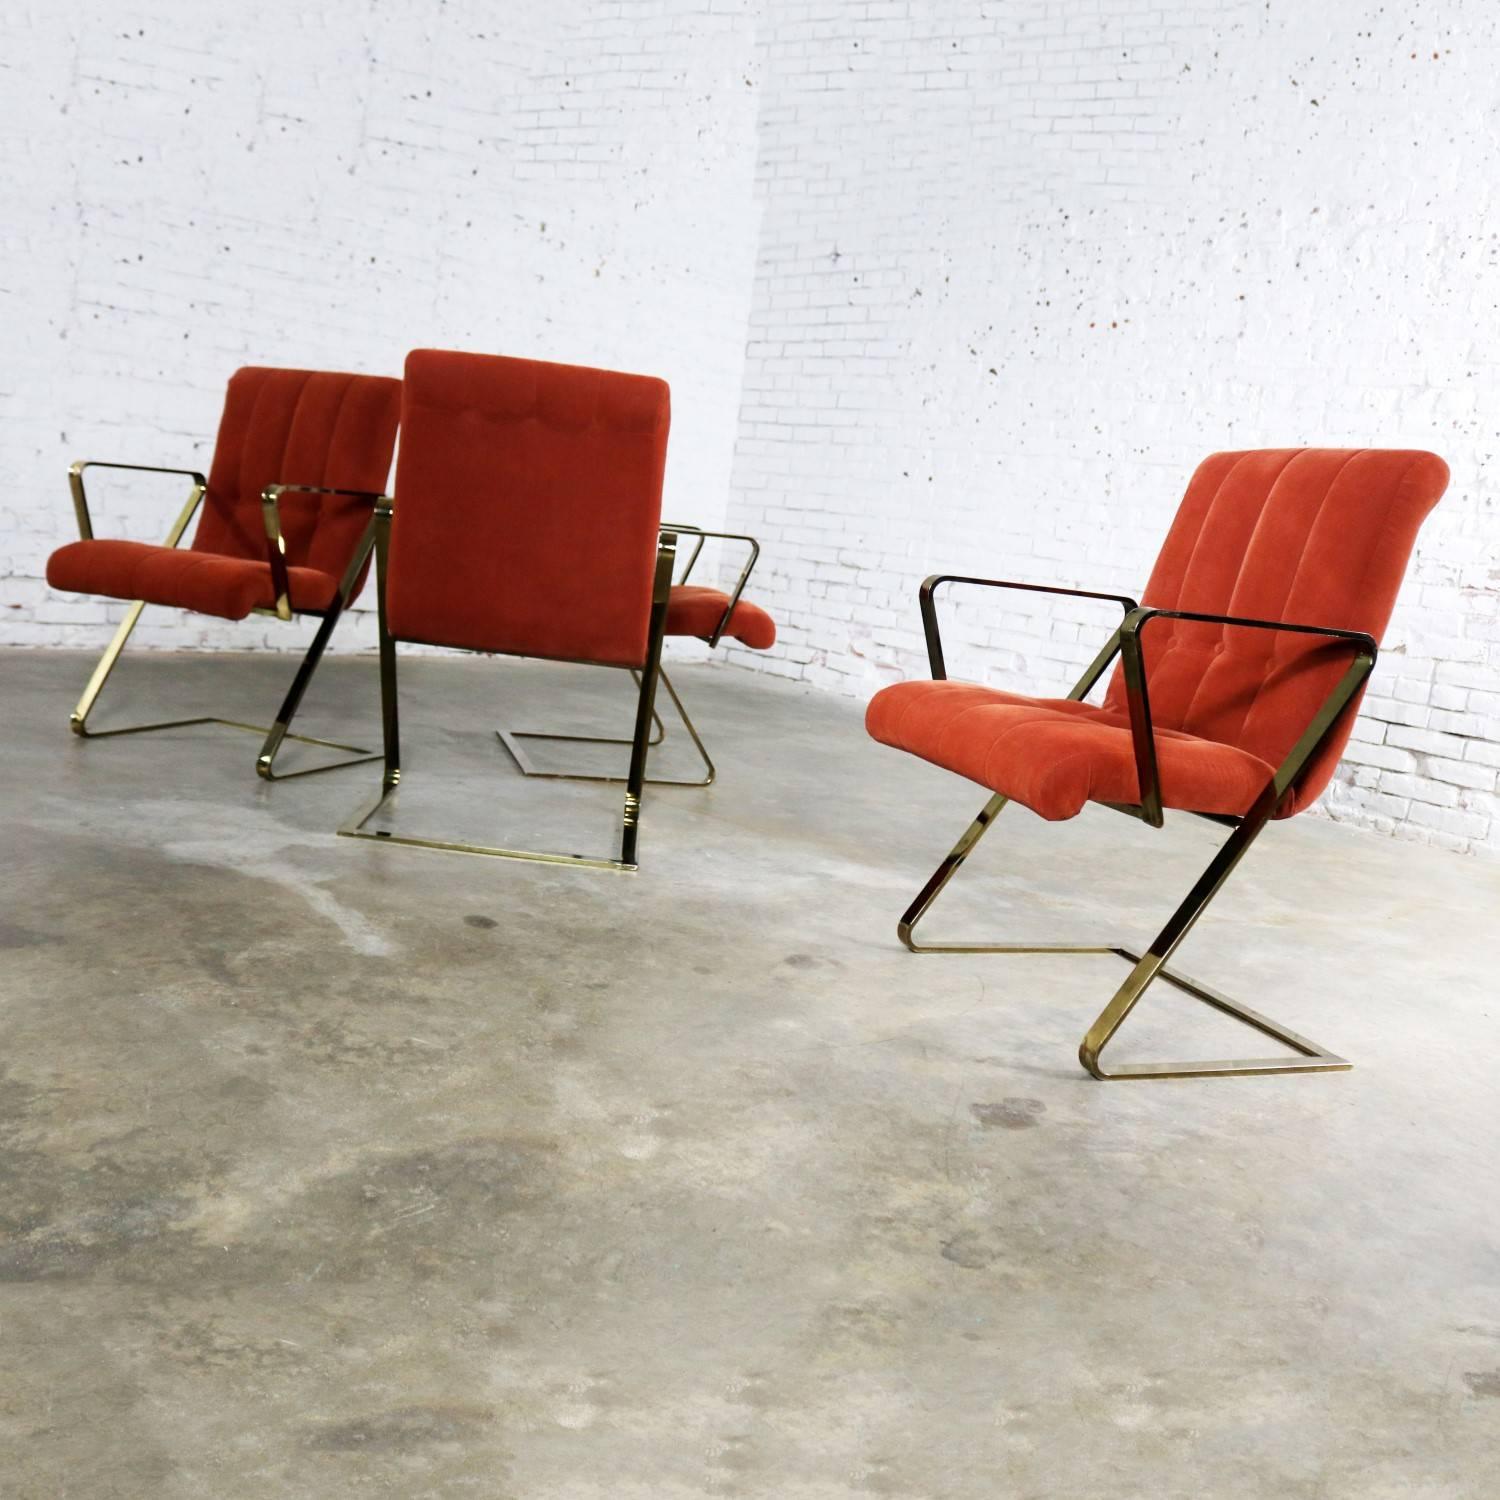 Steel Z Frame Brass Plate Dining Chairs Style Milo Baughman, Set of Four